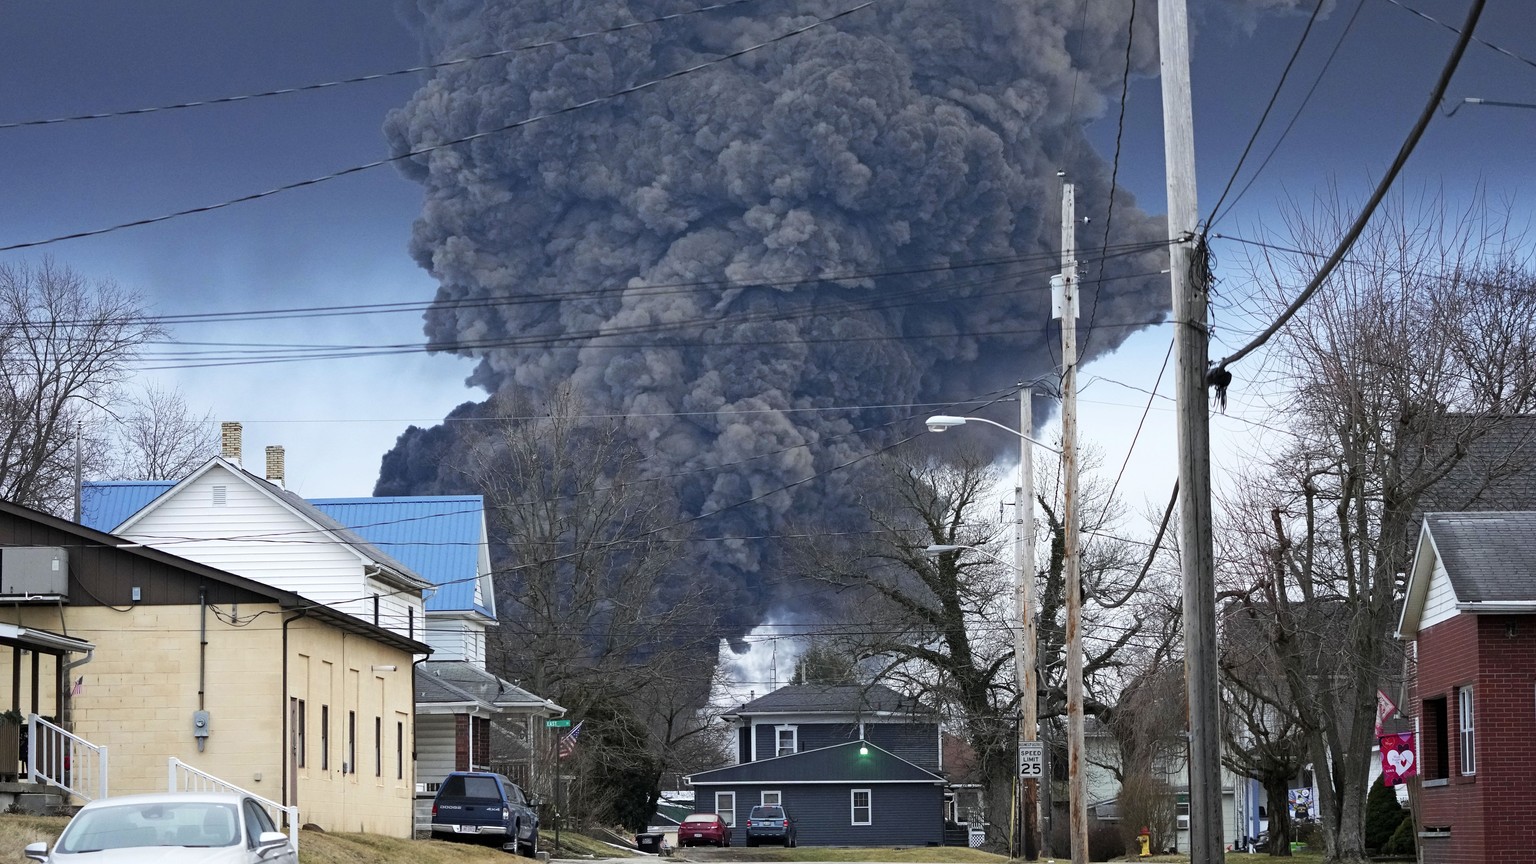 A large plume of smoke rises over East Palestine, Ohio, after a controlled detonation of a portion of the derailed Norfolk Southern trains Monday, Feb. 6, 2023. About 50 cars, including 10 carrying ha ...